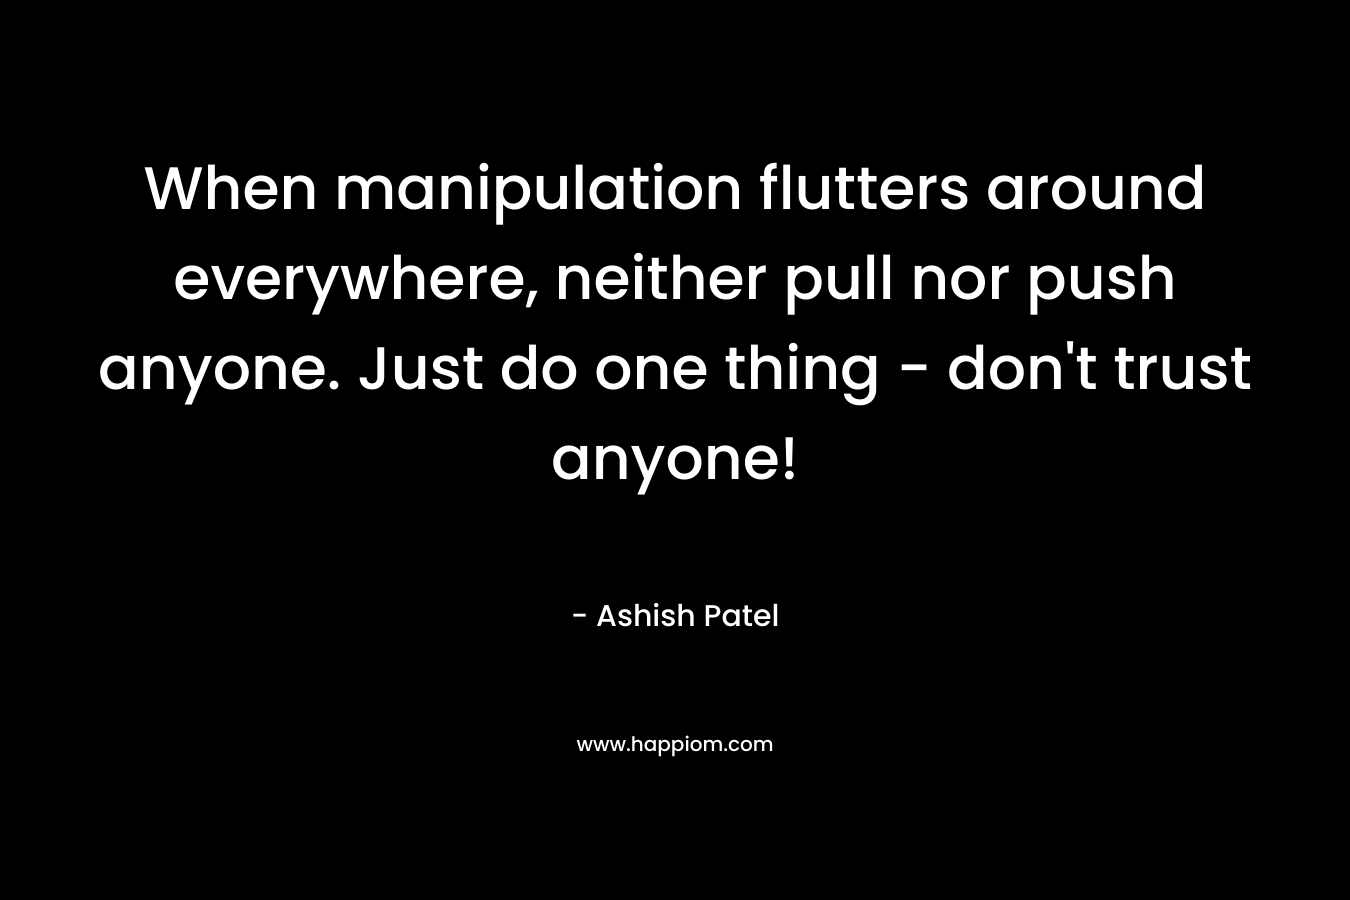 When manipulation flutters around everywhere, neither pull nor push anyone. Just do one thing – don’t trust anyone! – Ashish Patel